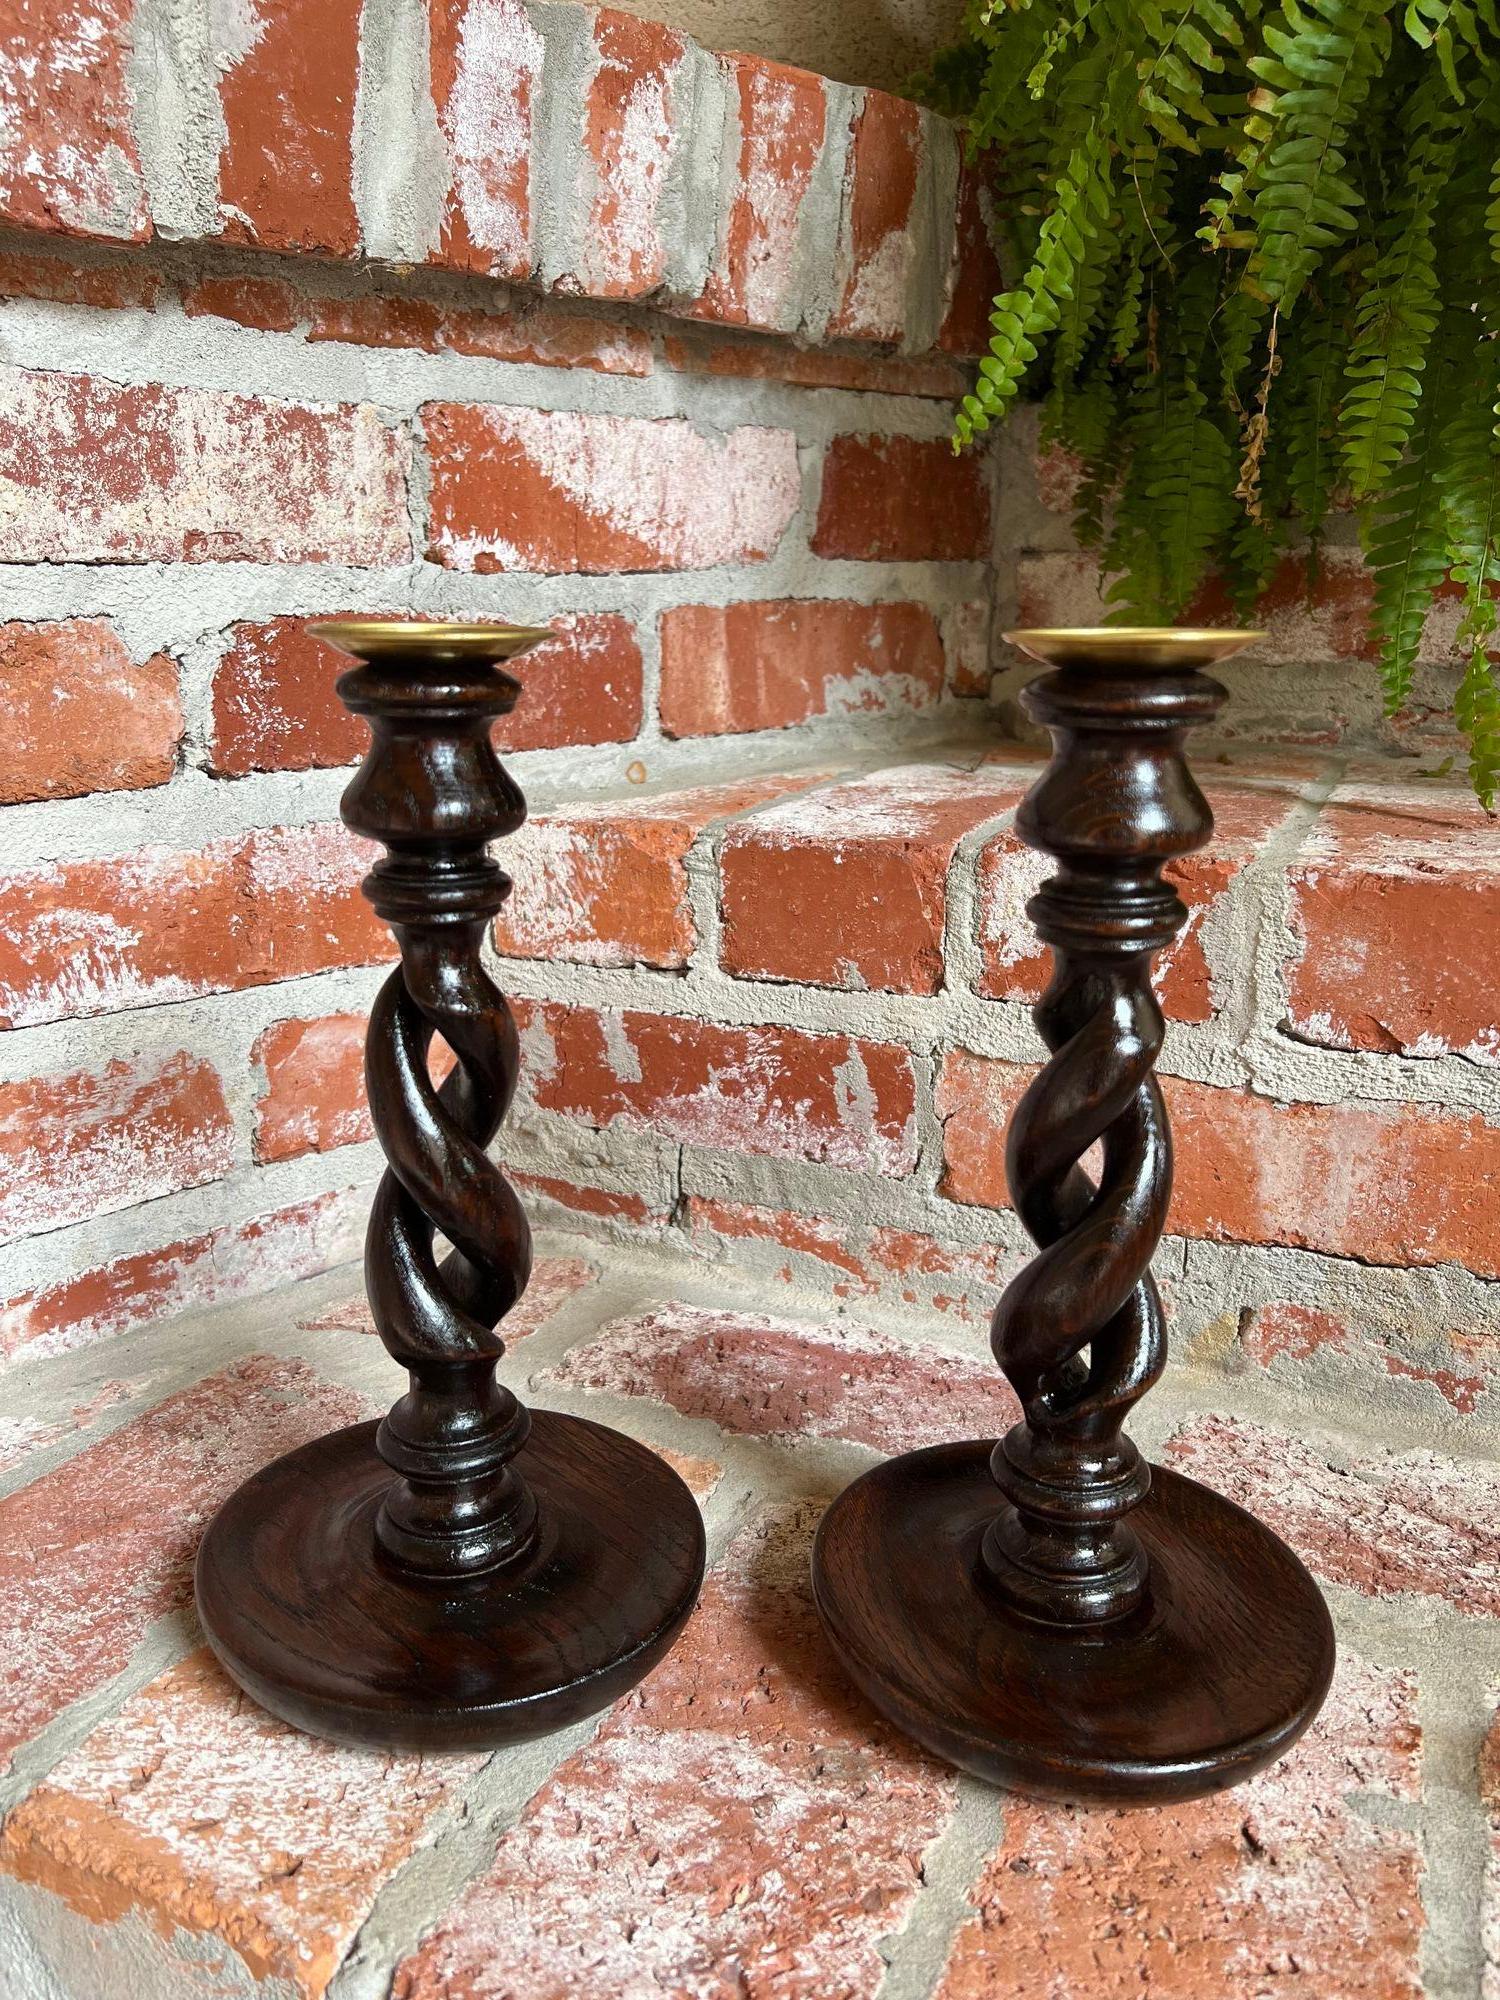 PAIR Set Antique English Oak OPEN Barley Twist Candlesticks Candle Holder Brass Bobeche

Direct from England, a stunning pair of antique English oak barley twist candlesticks! These are the “open barley twist” design, highly sought after and hard to